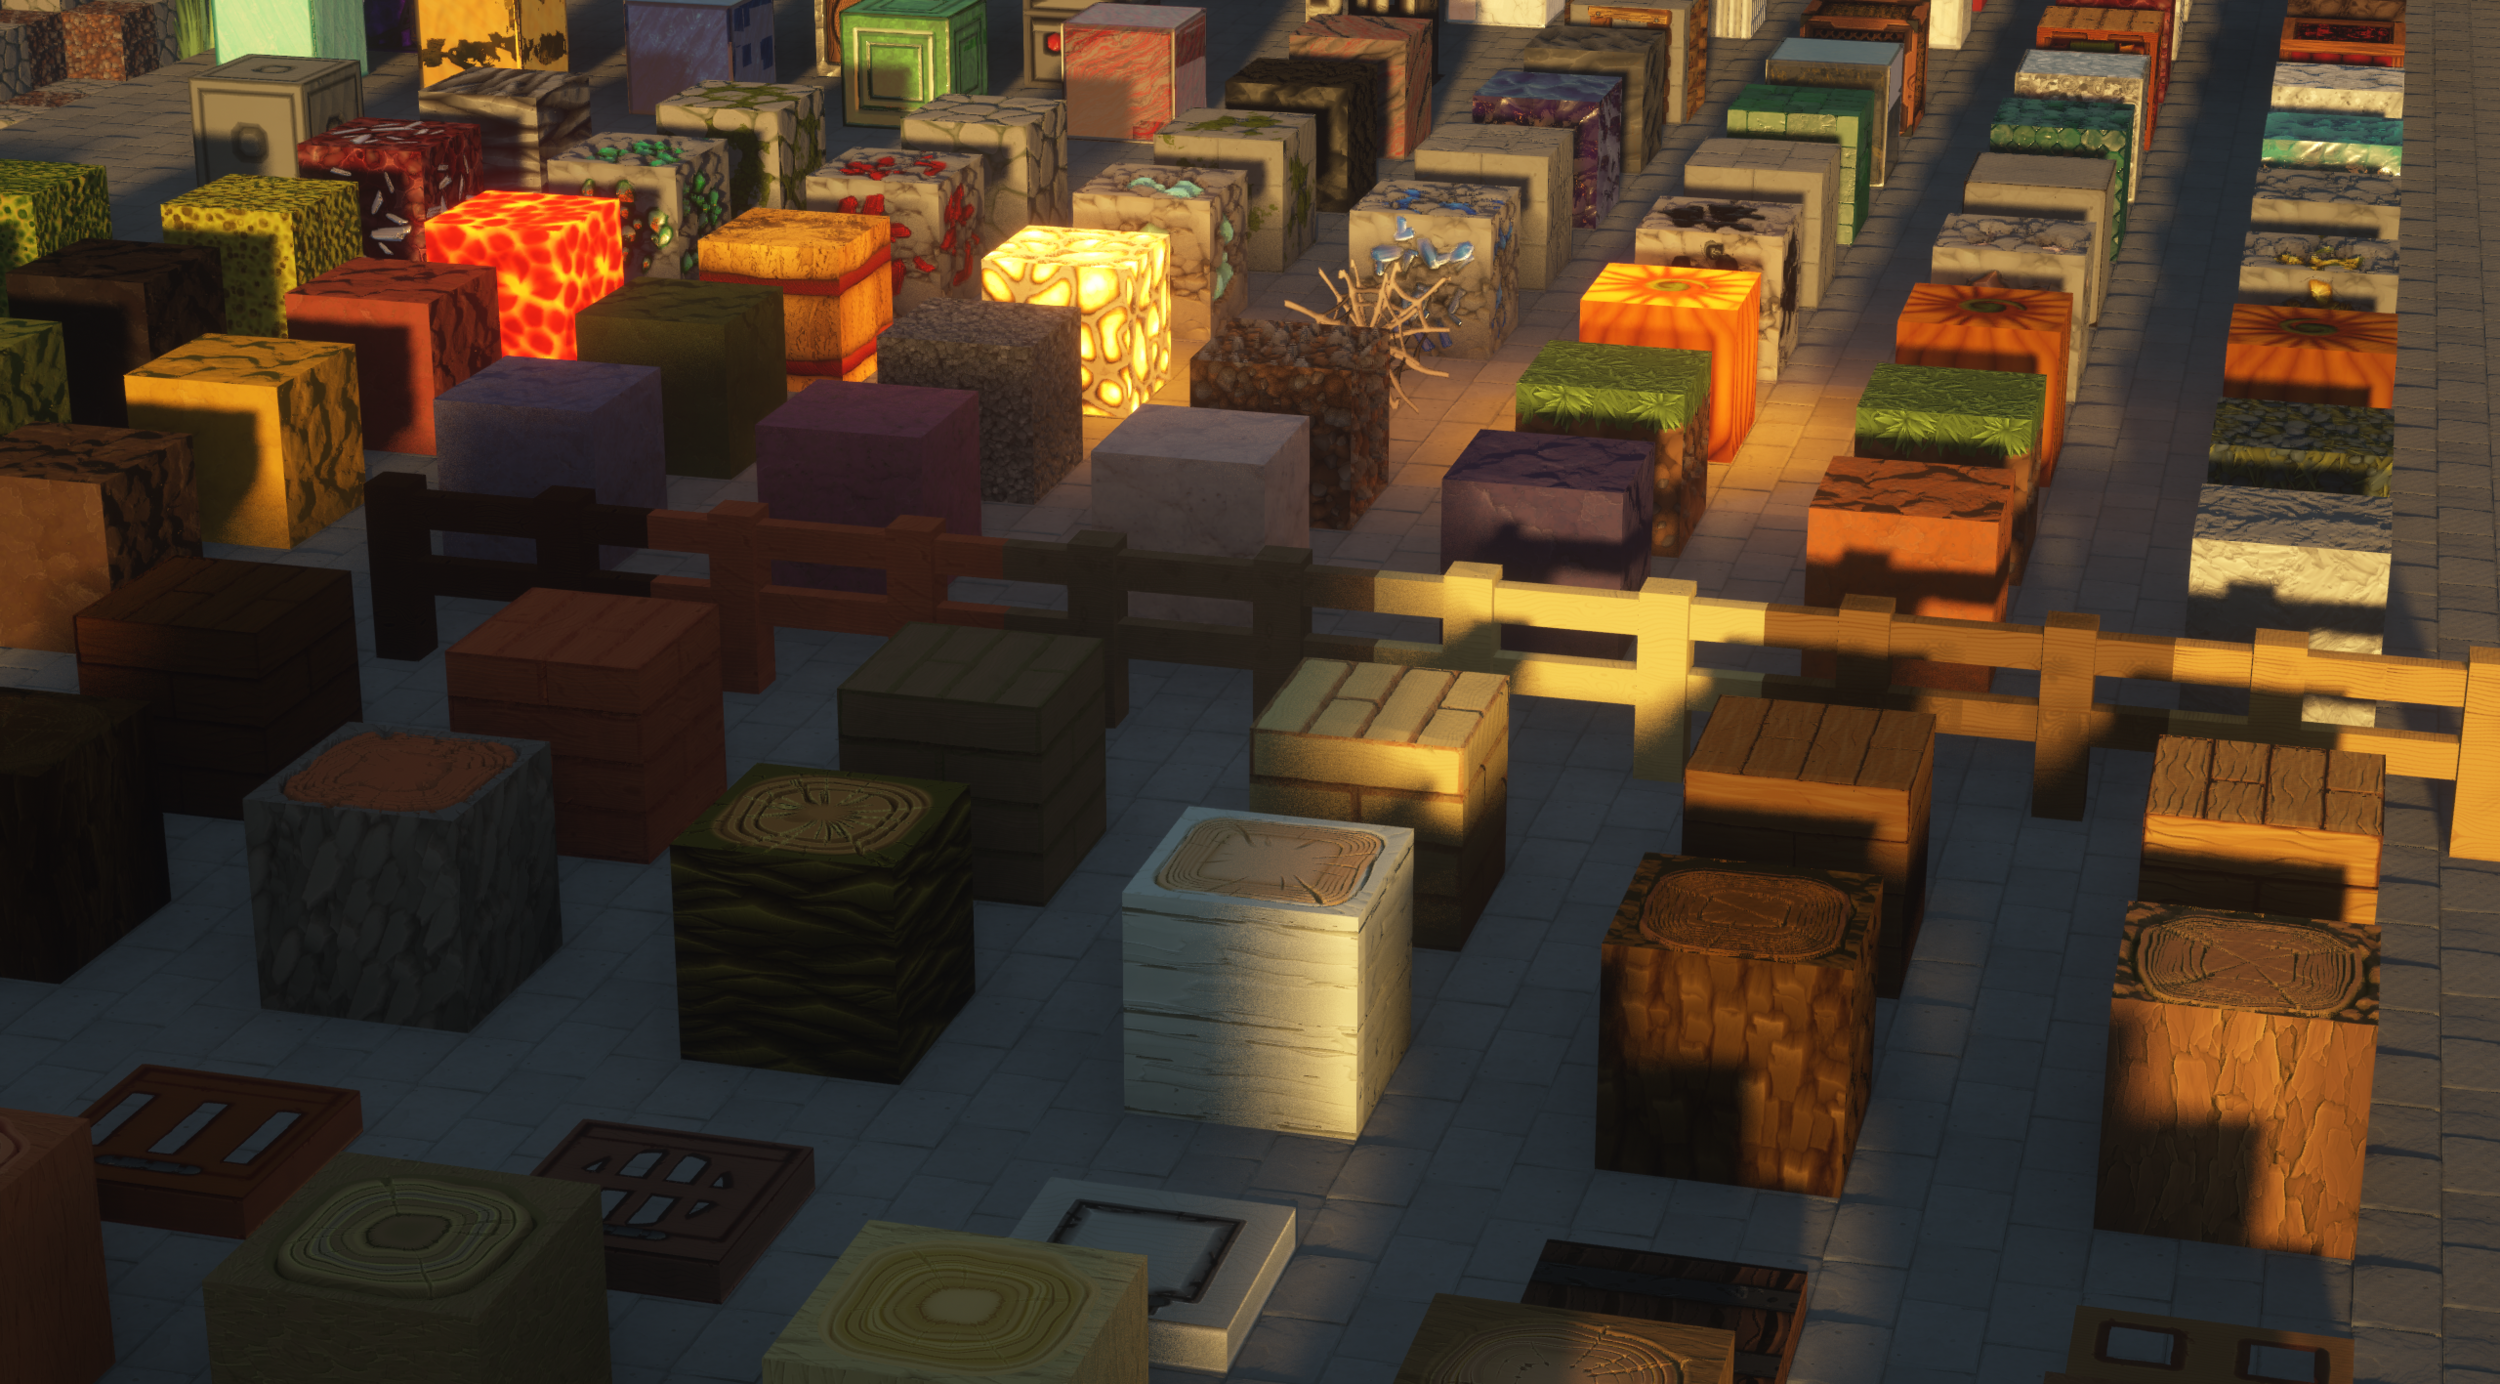 Midnight texture Pack Minecraft. Military Pillagers resource Pack. FTB presents abepack. Charco Lite texture. Pack import